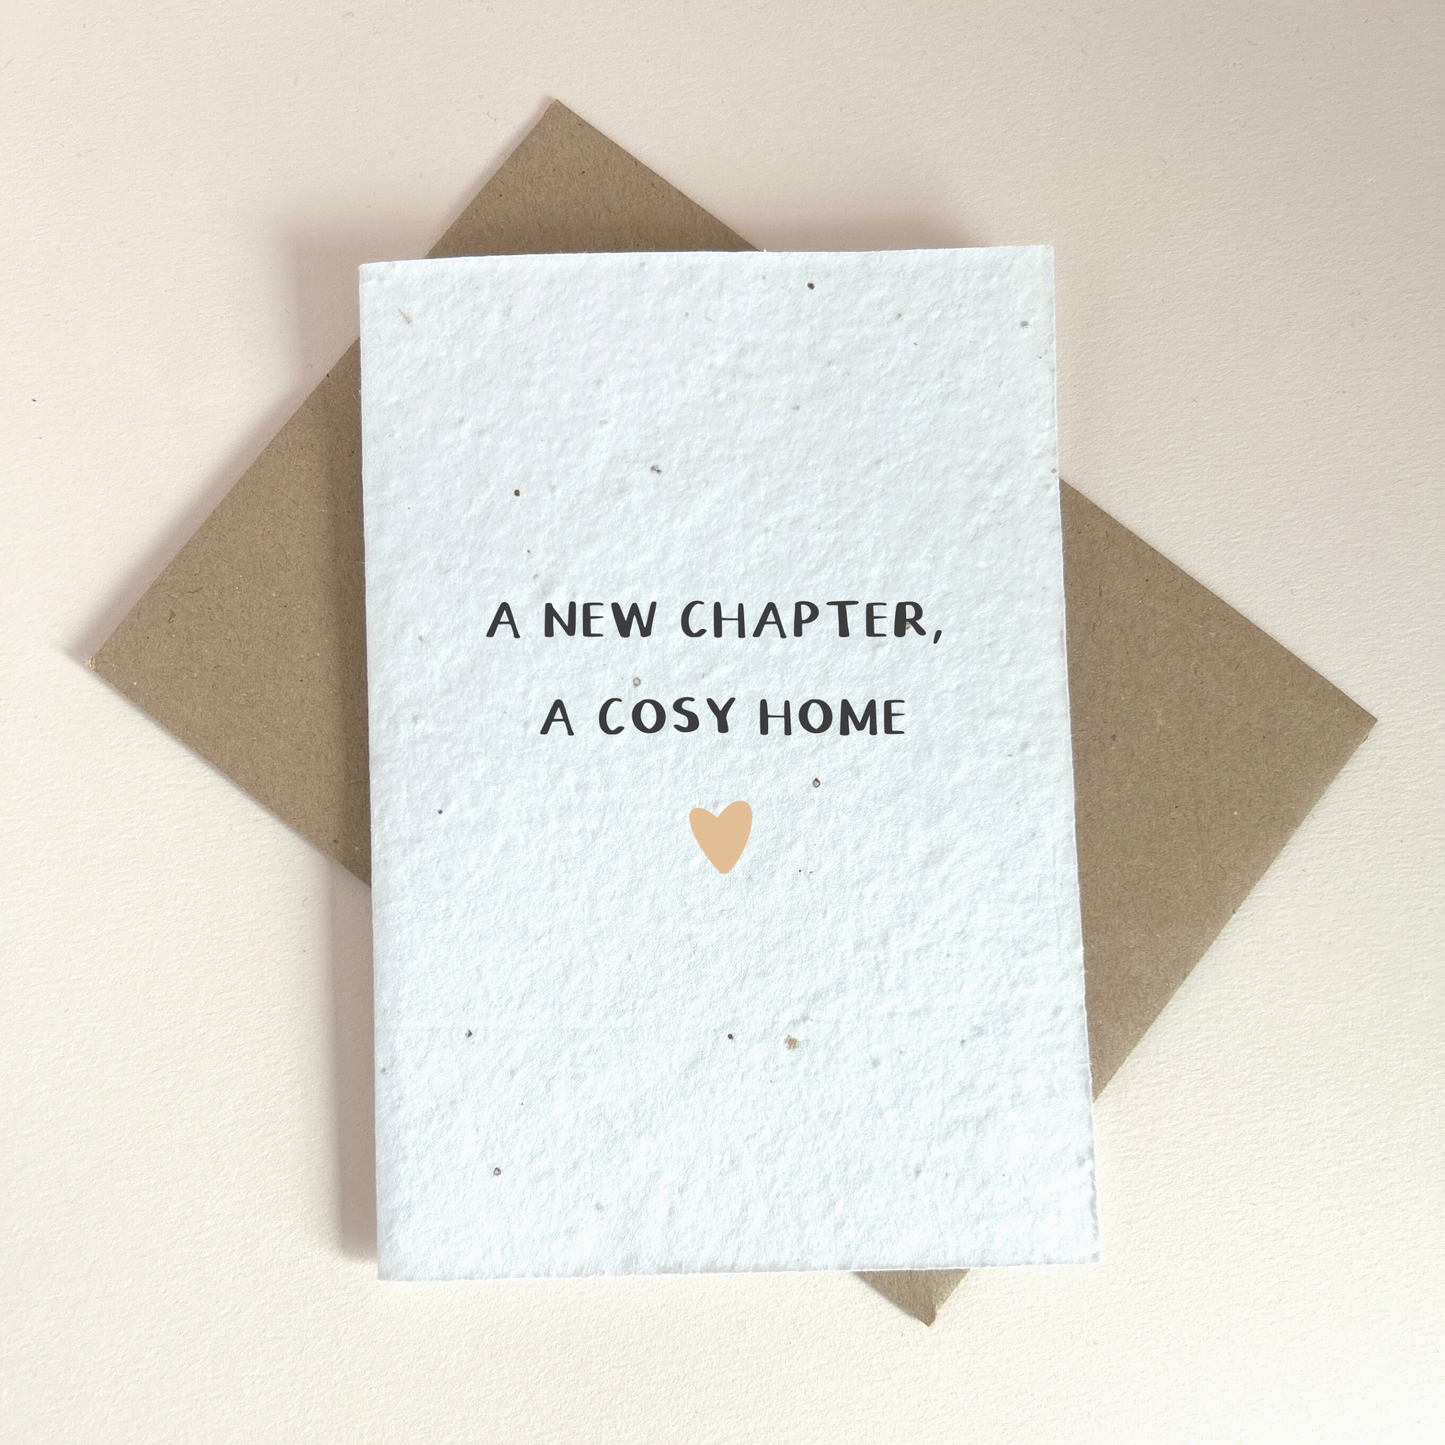 A New Chapter, A Cosy Home